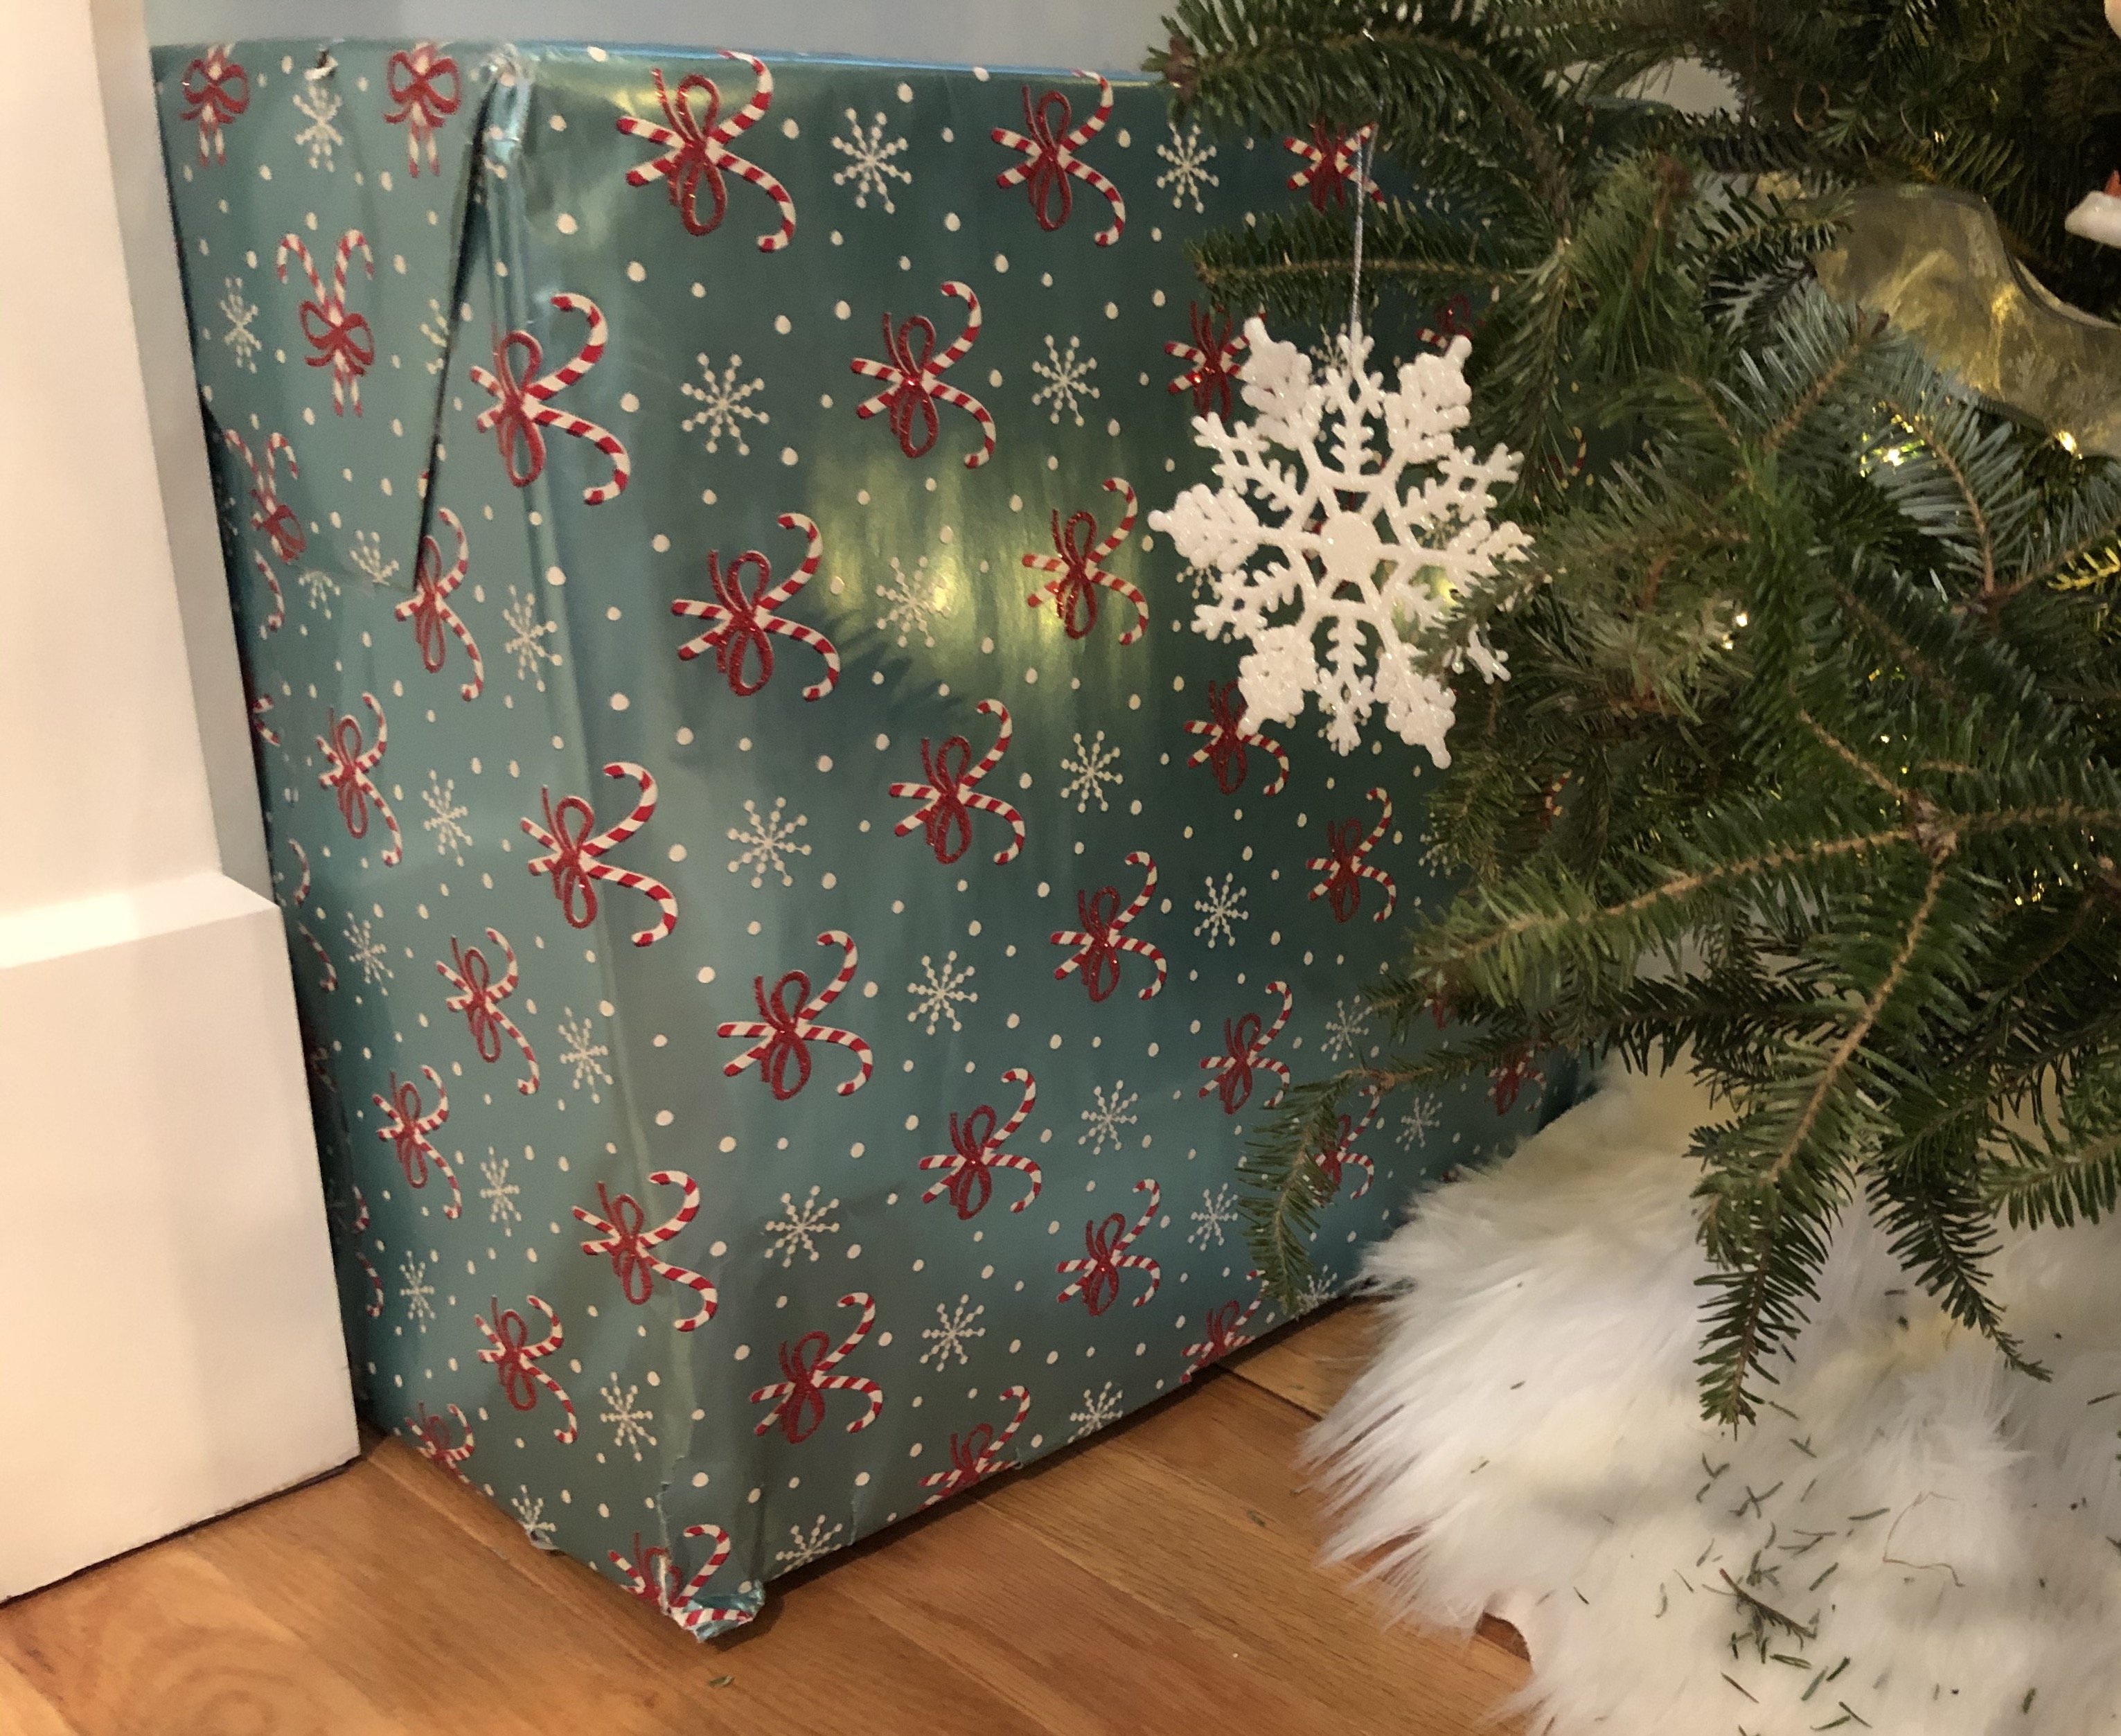 A bucket covered in a box decorated like a present